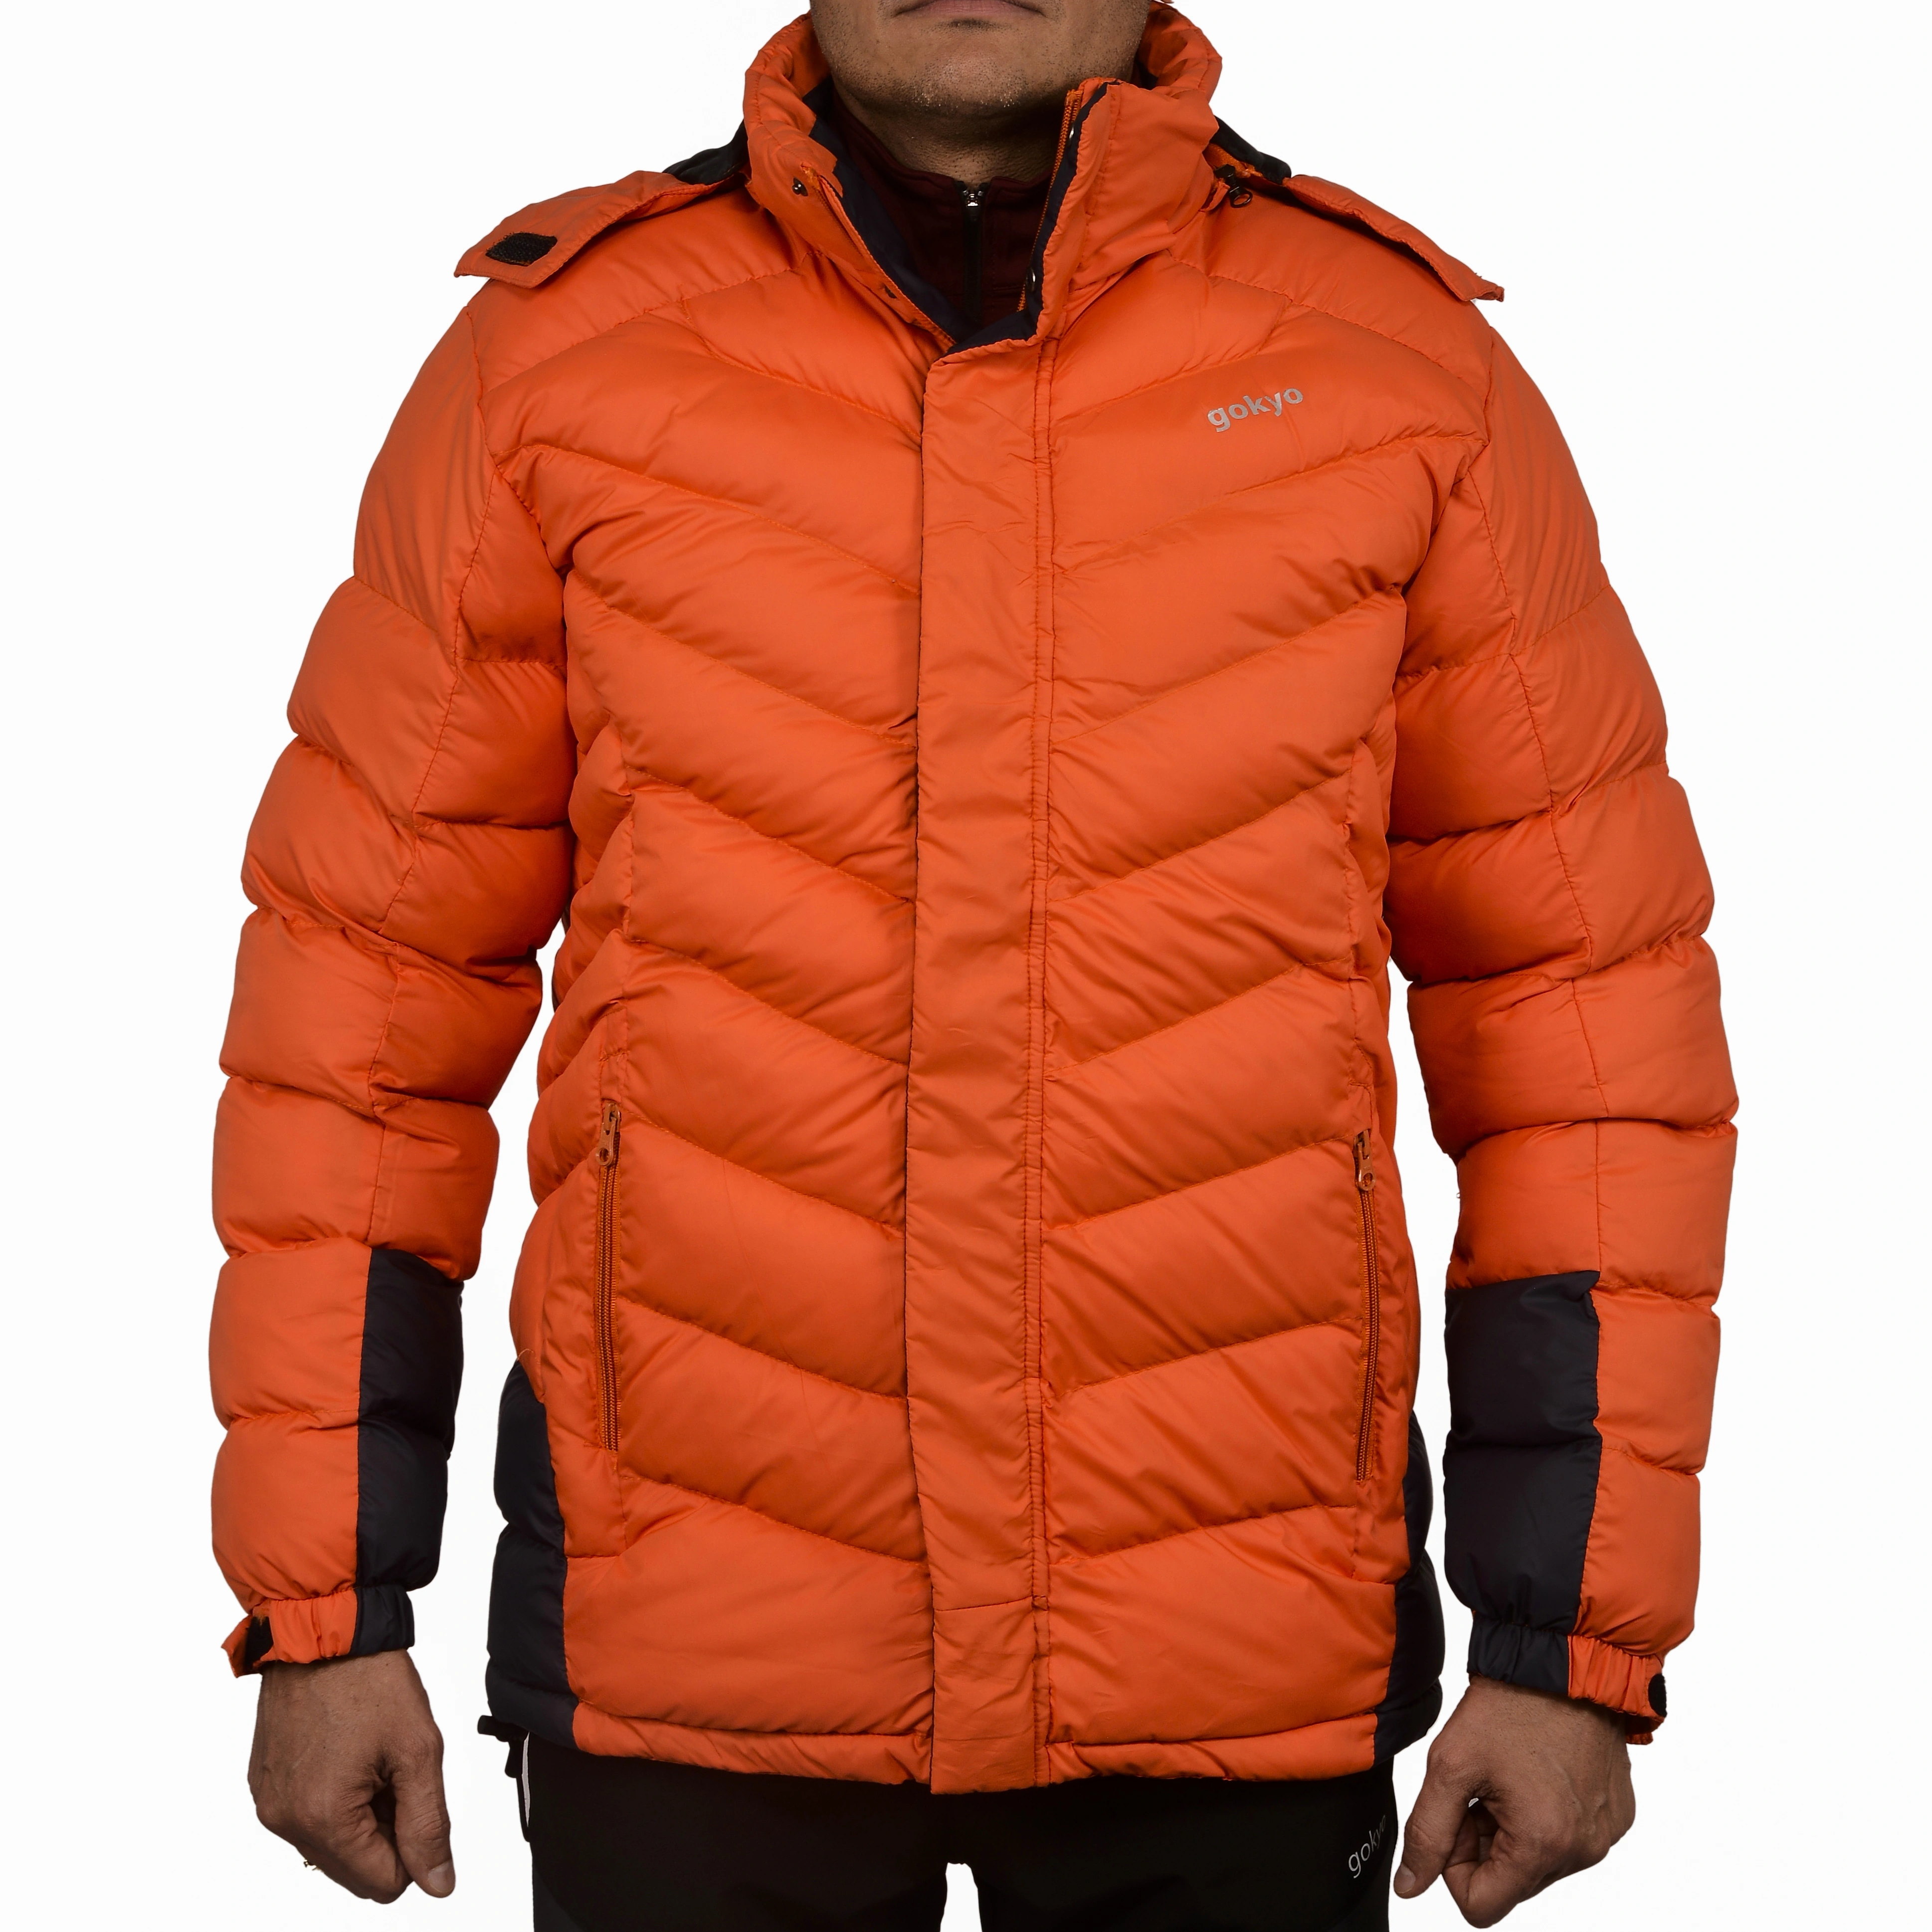 K2 Survivor Down Jacket for Men: Stylized Functionality for Extreme Cold Weather Expeditions (Up to -20°C)-230102